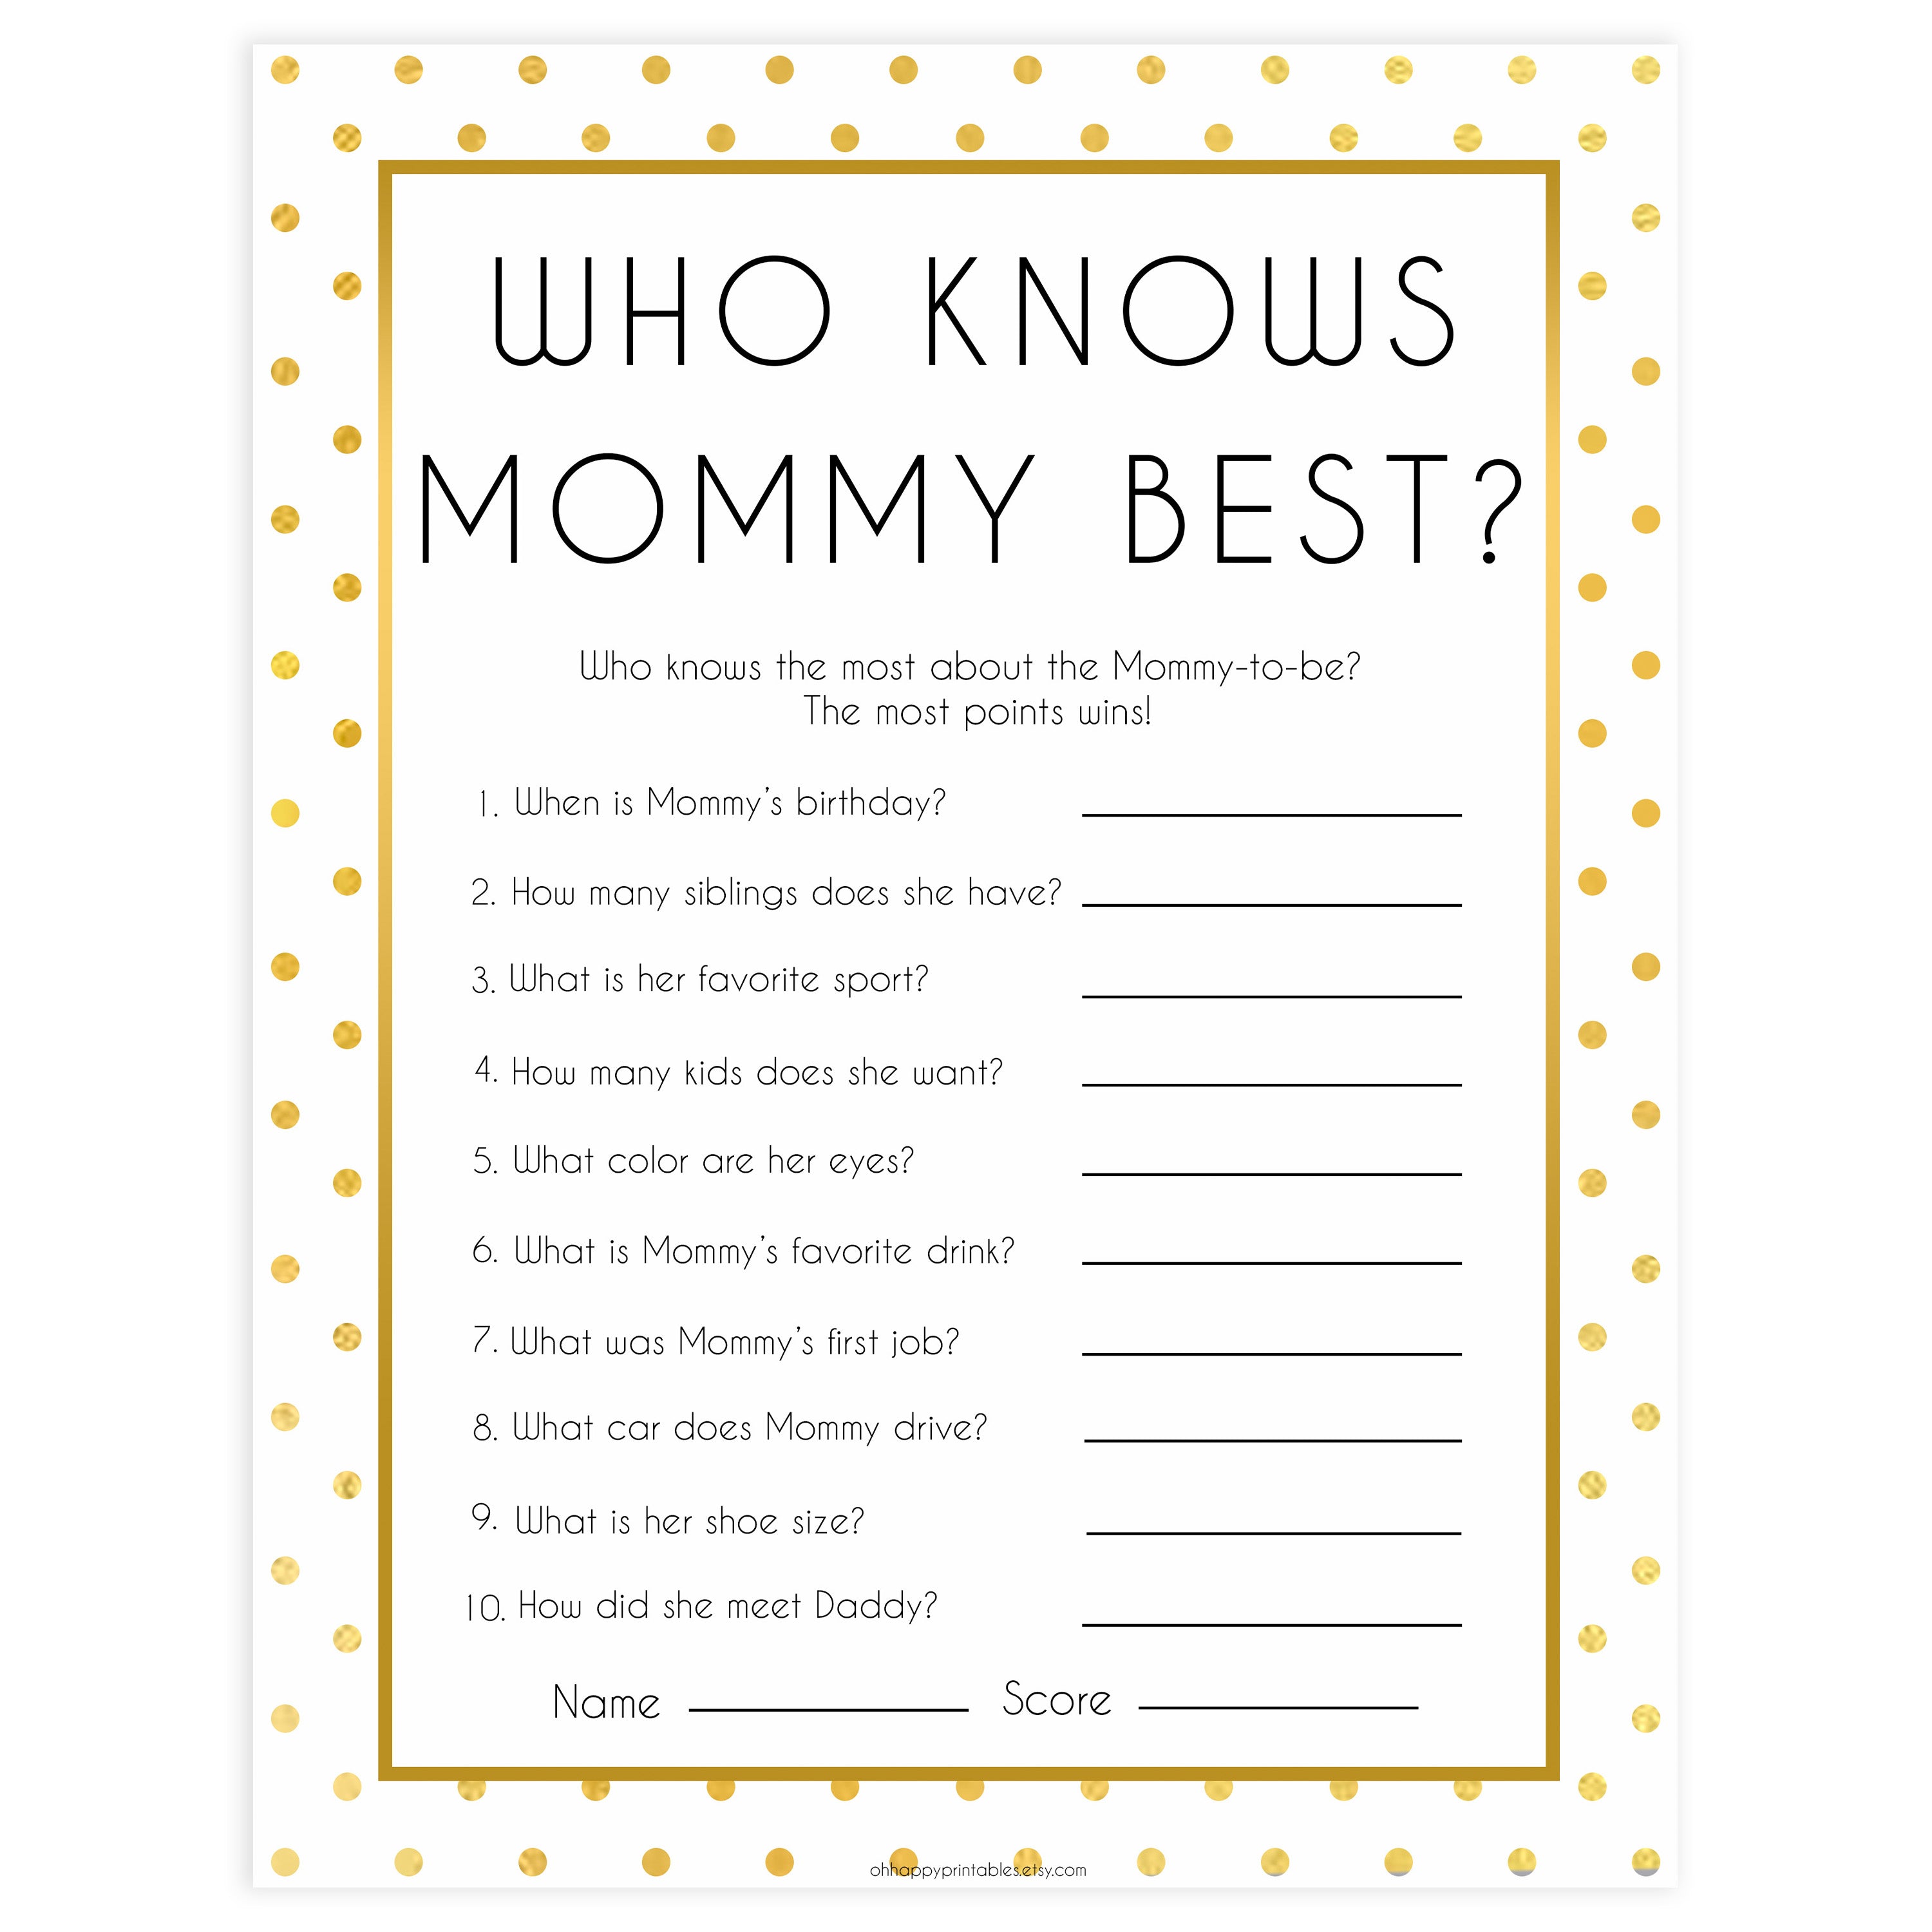 who knows mommy best game, who knows mummy game, Printable baby shower games, baby gold dots fun baby games, baby shower games, fun baby shower ideas, top baby shower ideas, gold glitter shower baby shower, friends baby shower ideas